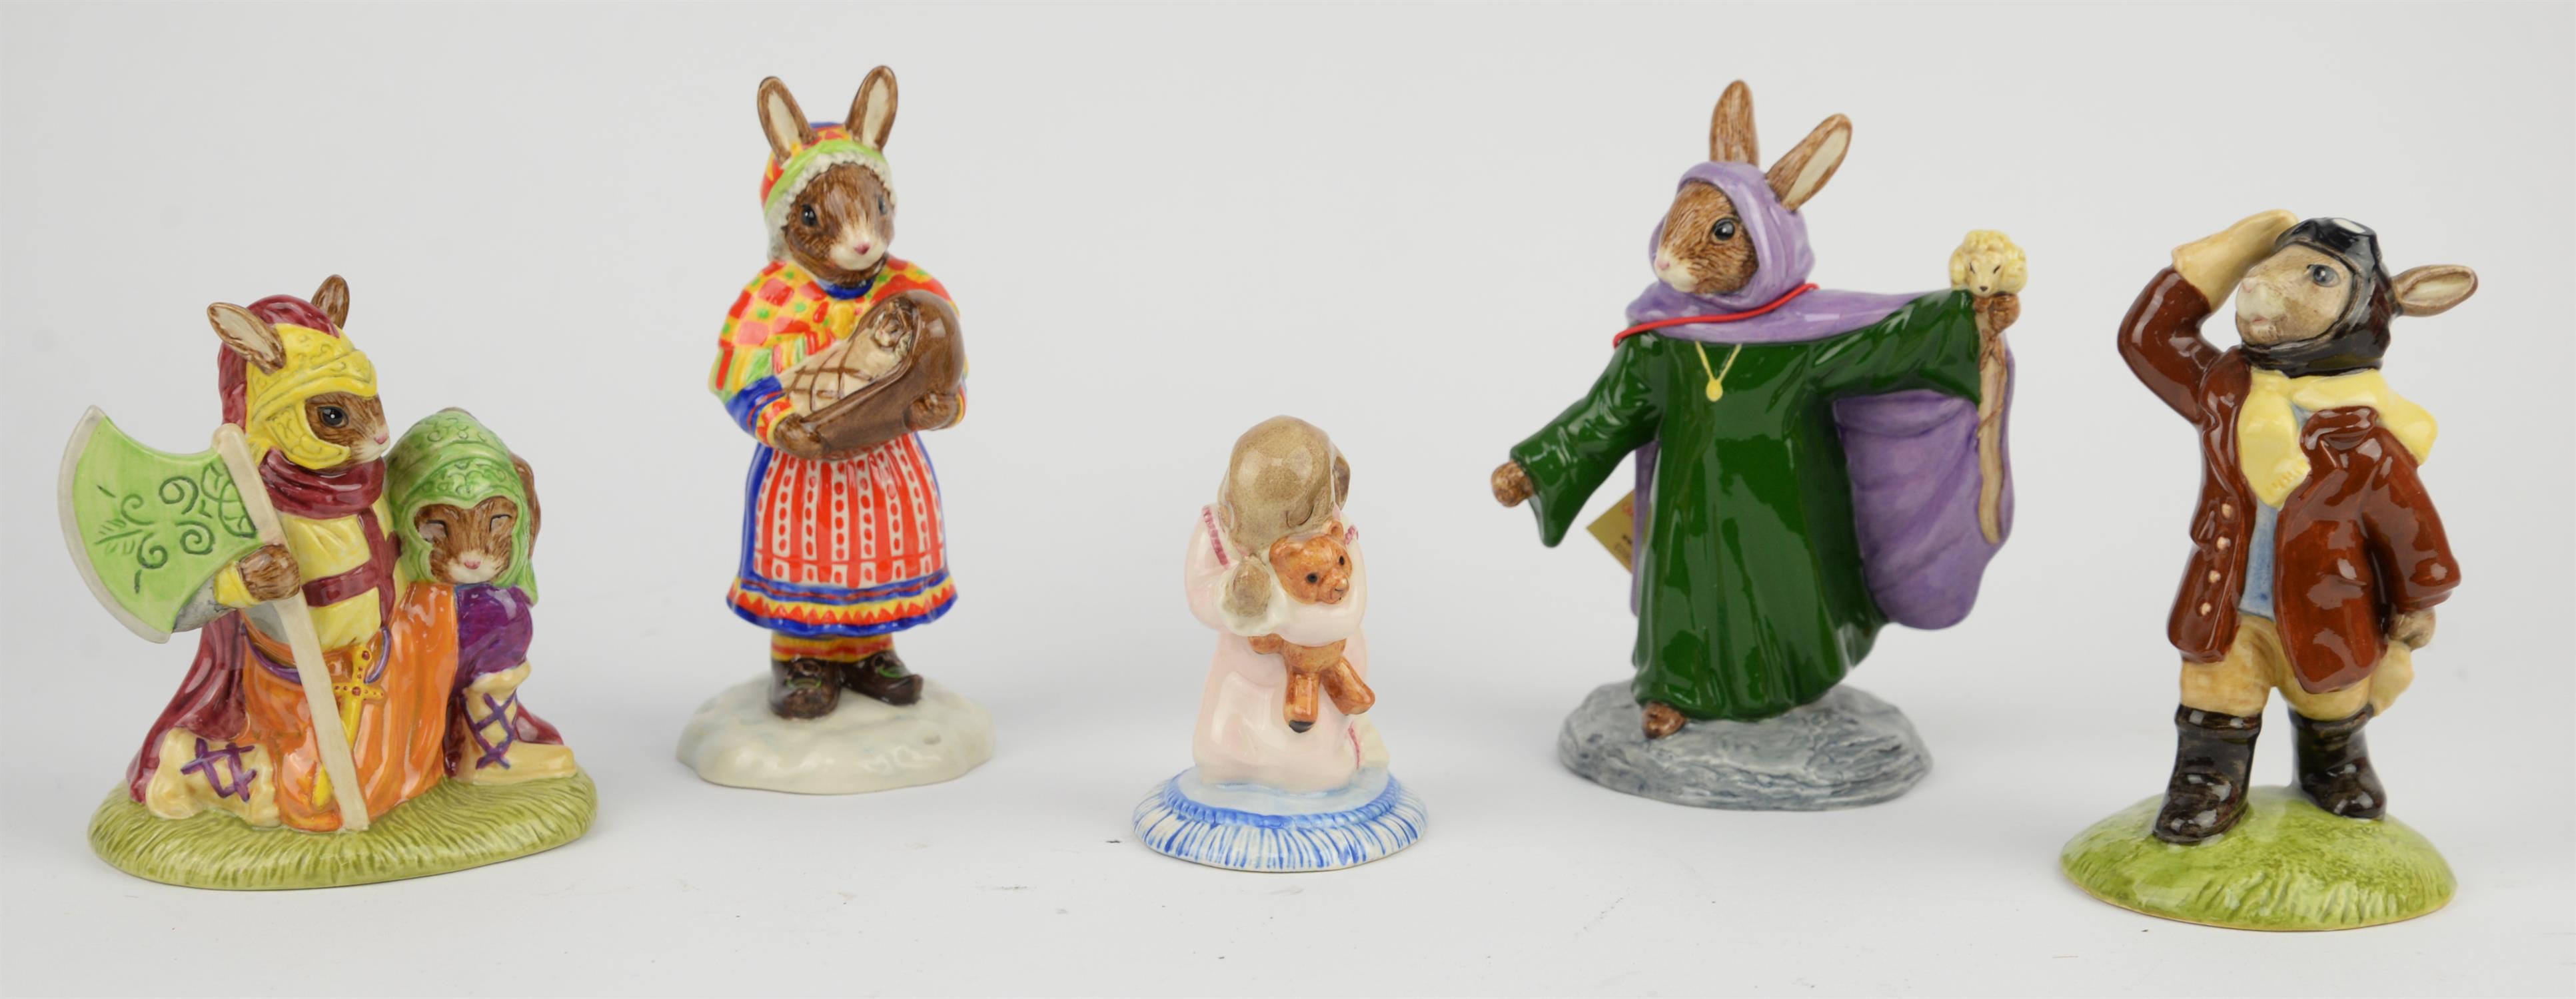 Royal Doulton Bunnikins figure groups in boxes, twenty two figures, to include Online bunny,